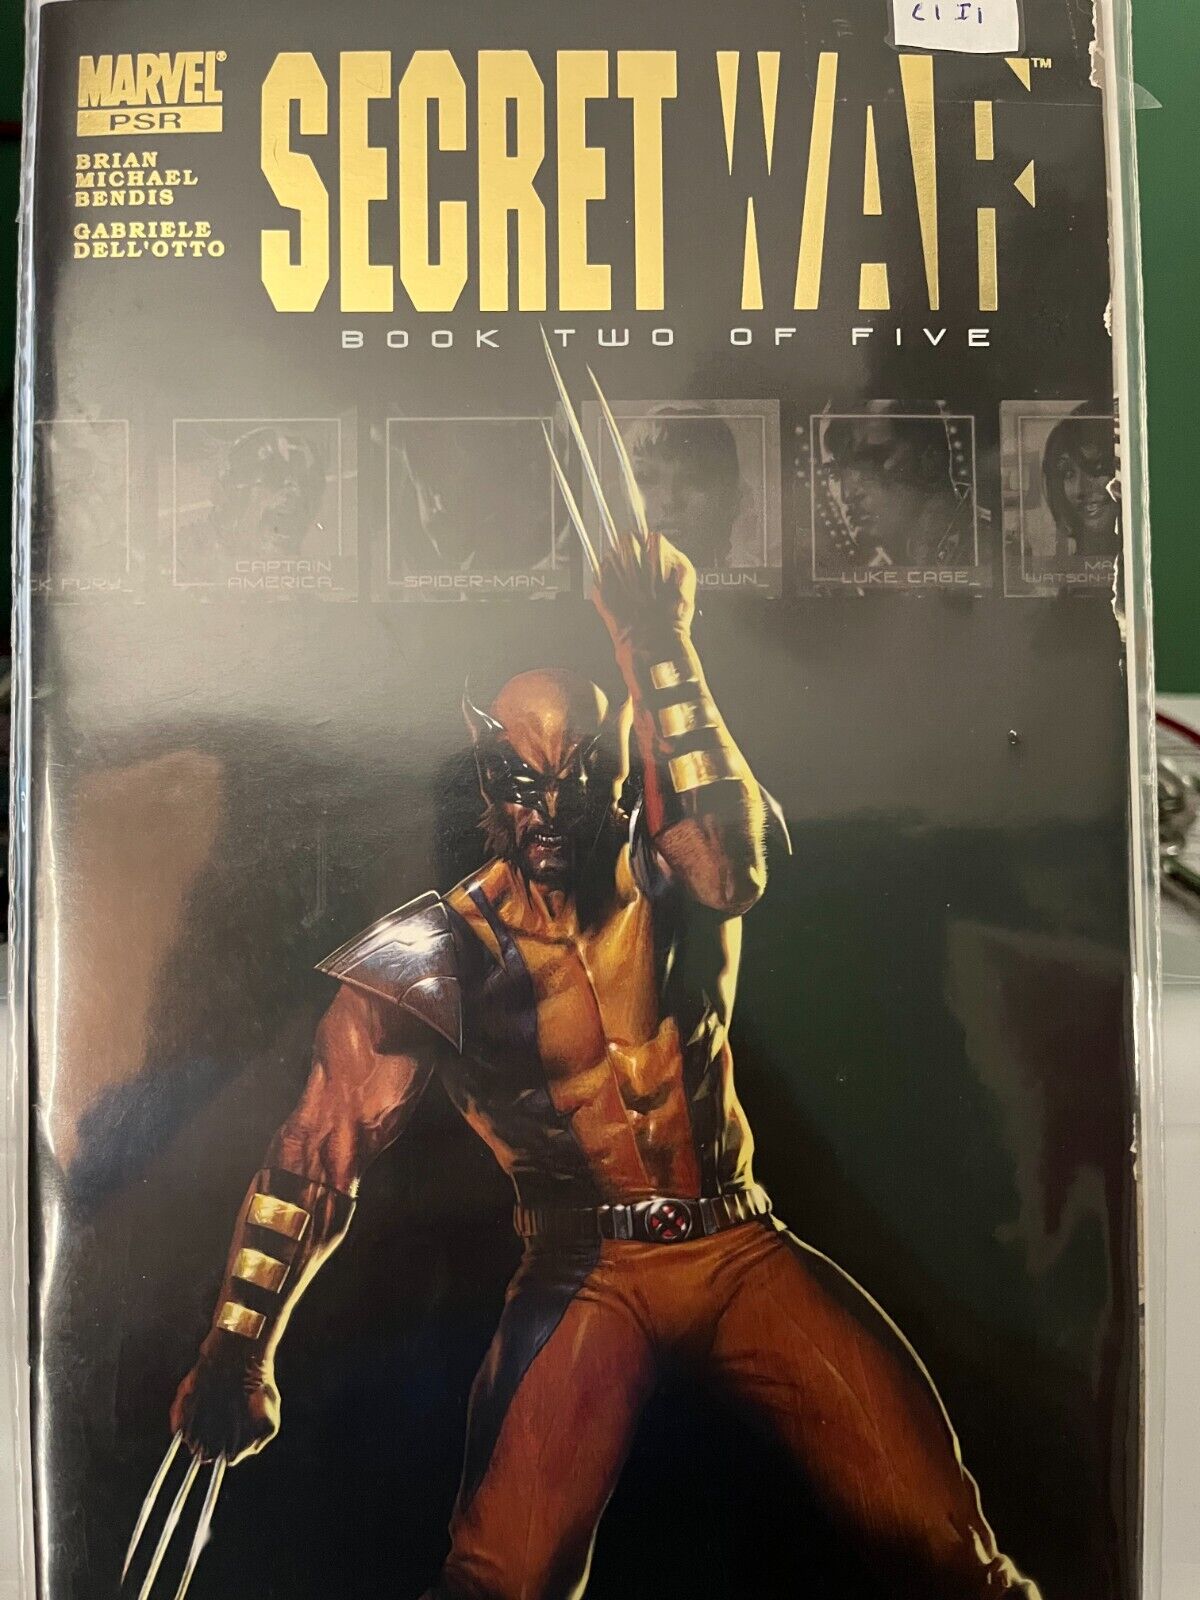 Marvel Secret War Book Two Of Five Marvel Comics Wolverine Softcover Comic Book